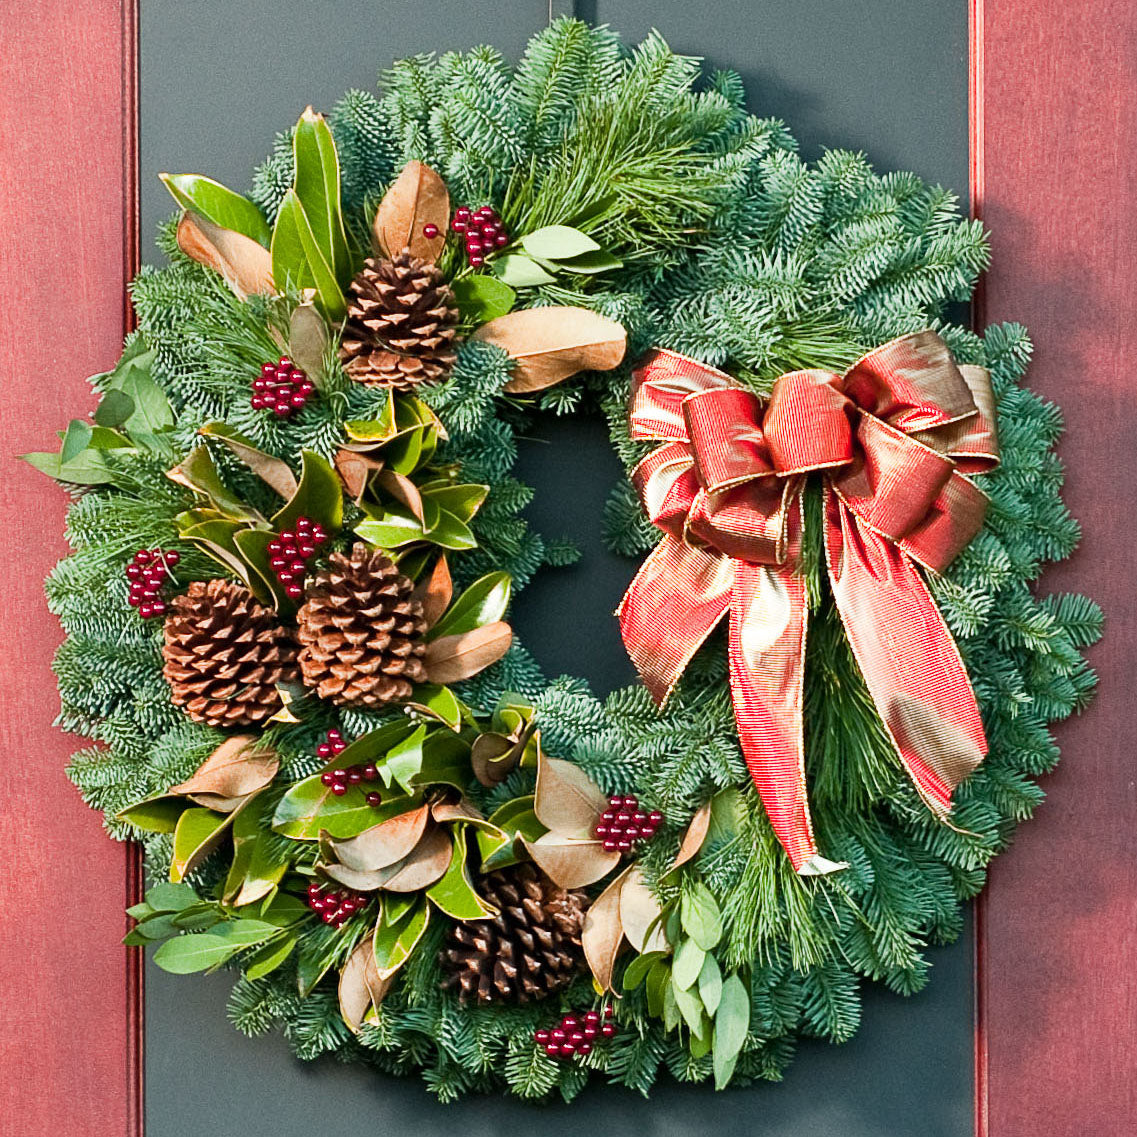 A wreath made of noble fir, magnolia leaves, bay leaves, white pine and incense cedar with ponderosa pine cones, faux burgundy berry clusters, and a shimmery gold/reddish-orange bow hung on a black and red door.